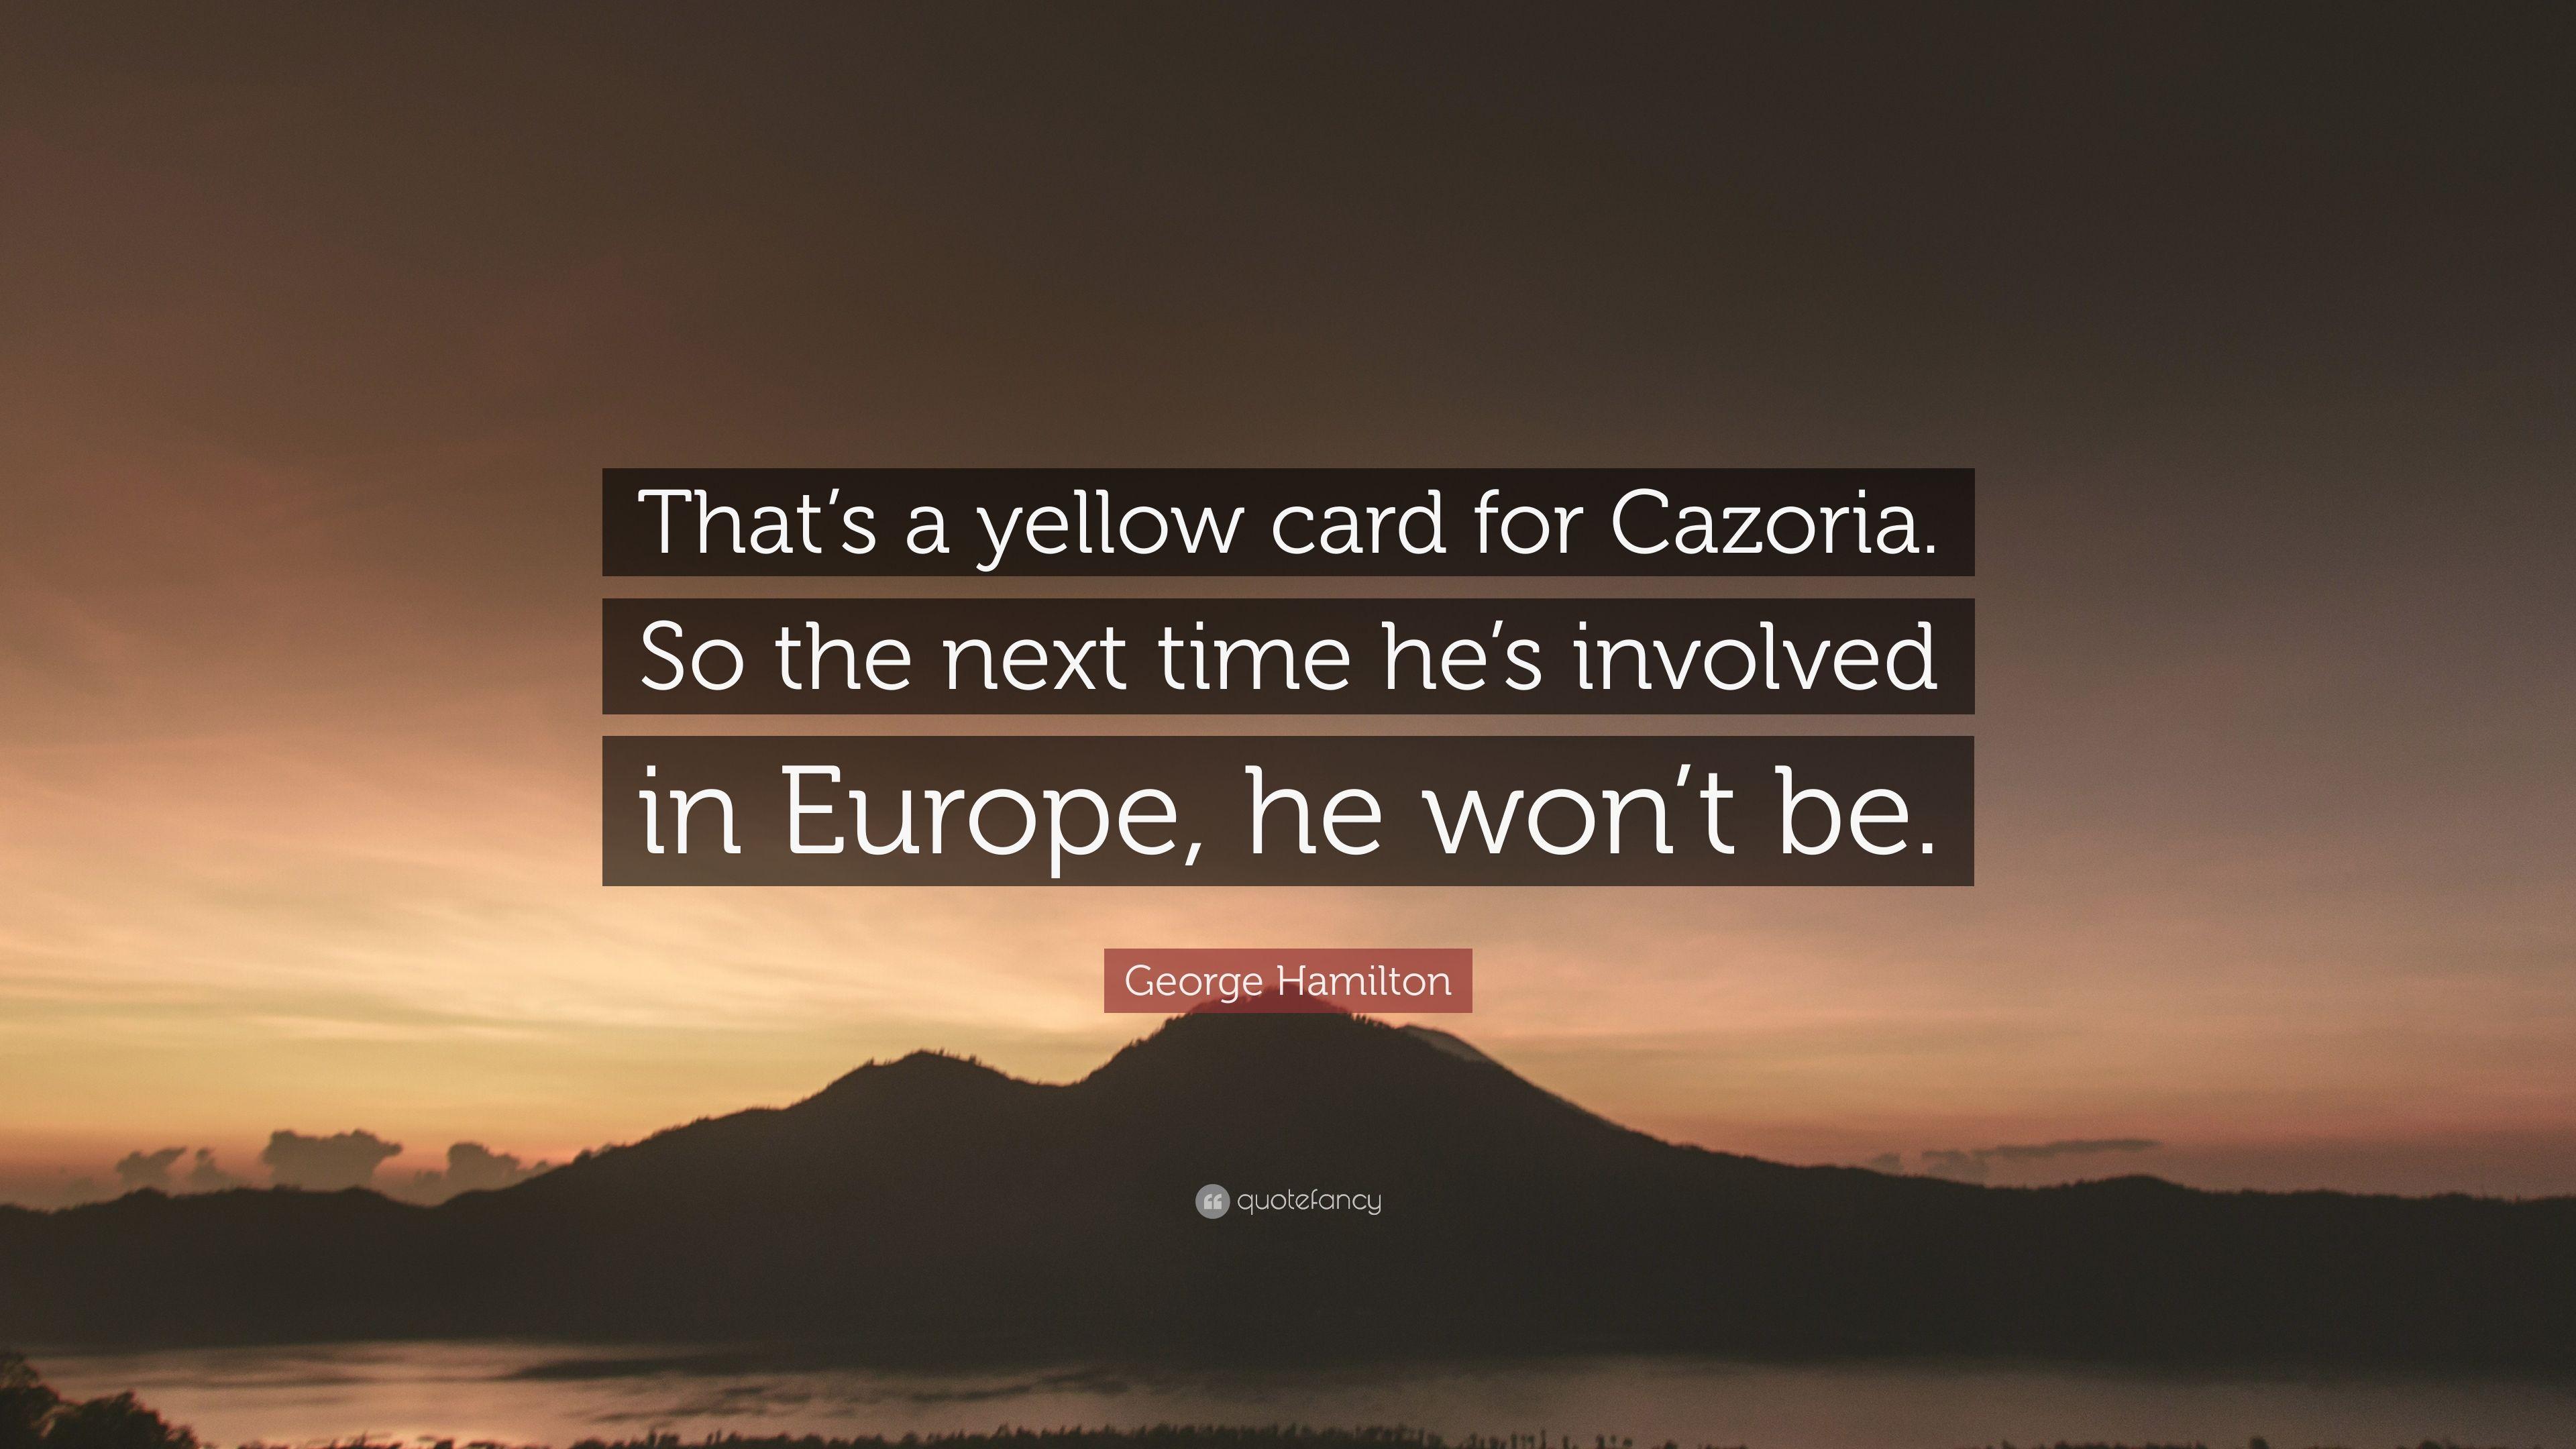 George Hamilton Quote: “That's a yellow card for Cazoria. So